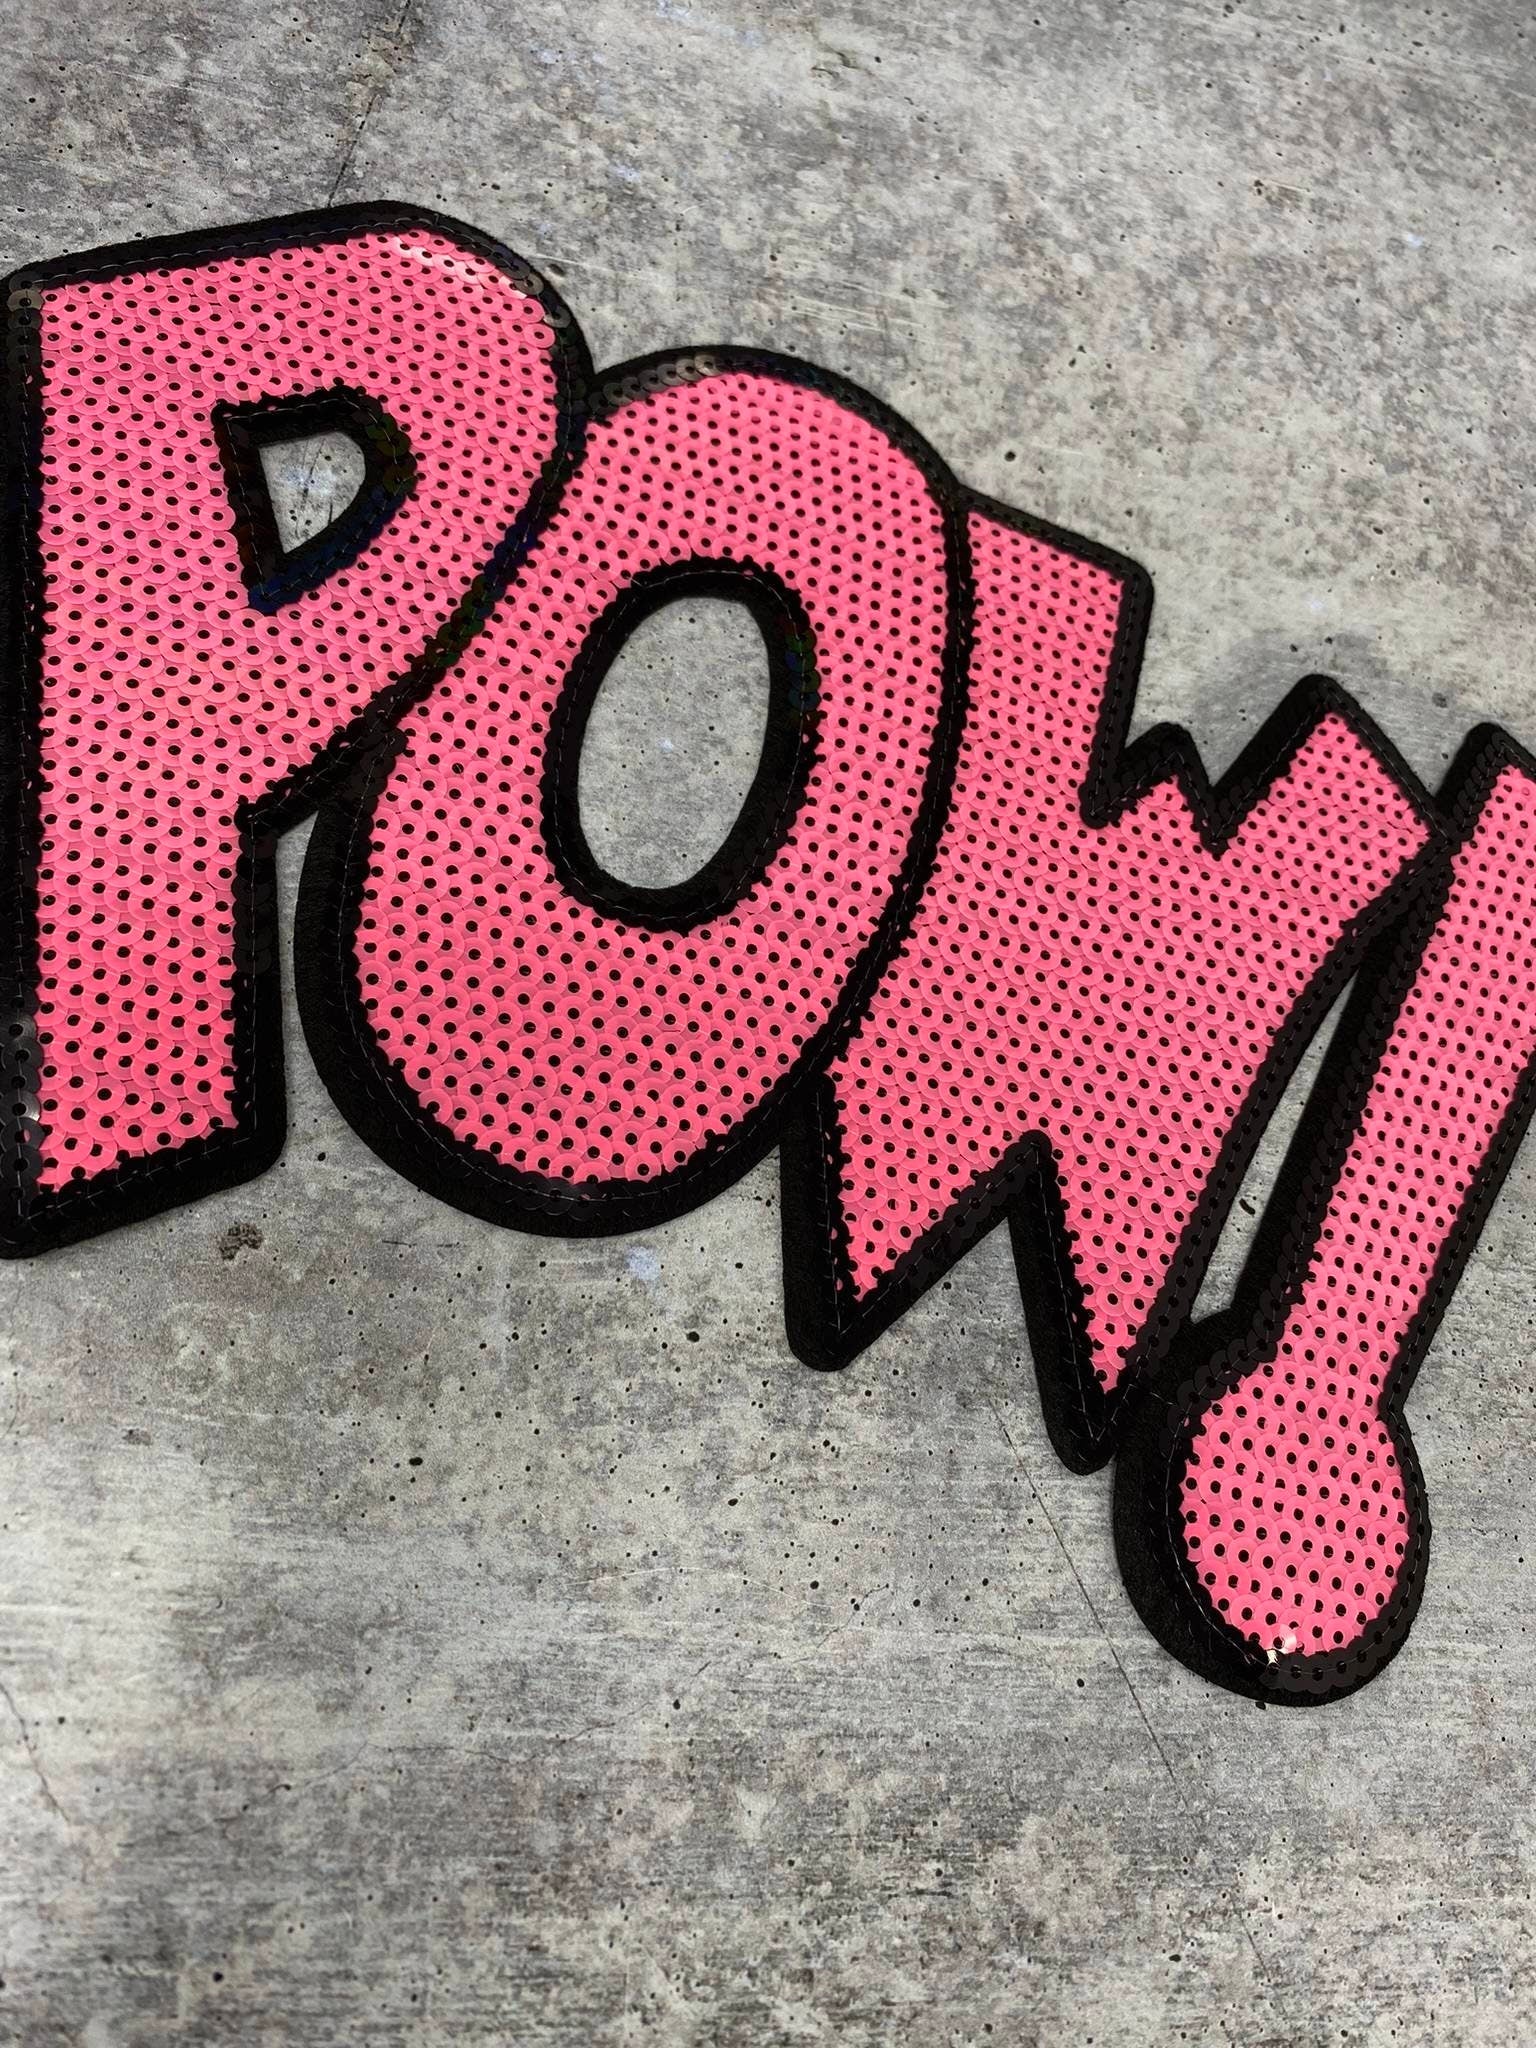 NEW, Pink "POW!" Sequins Sparkling Patch, Large Applique, Statement Patch, Iron-on, Size 10"x6", DIY Jacket, Varsity Jacket, Camo, Hoodie